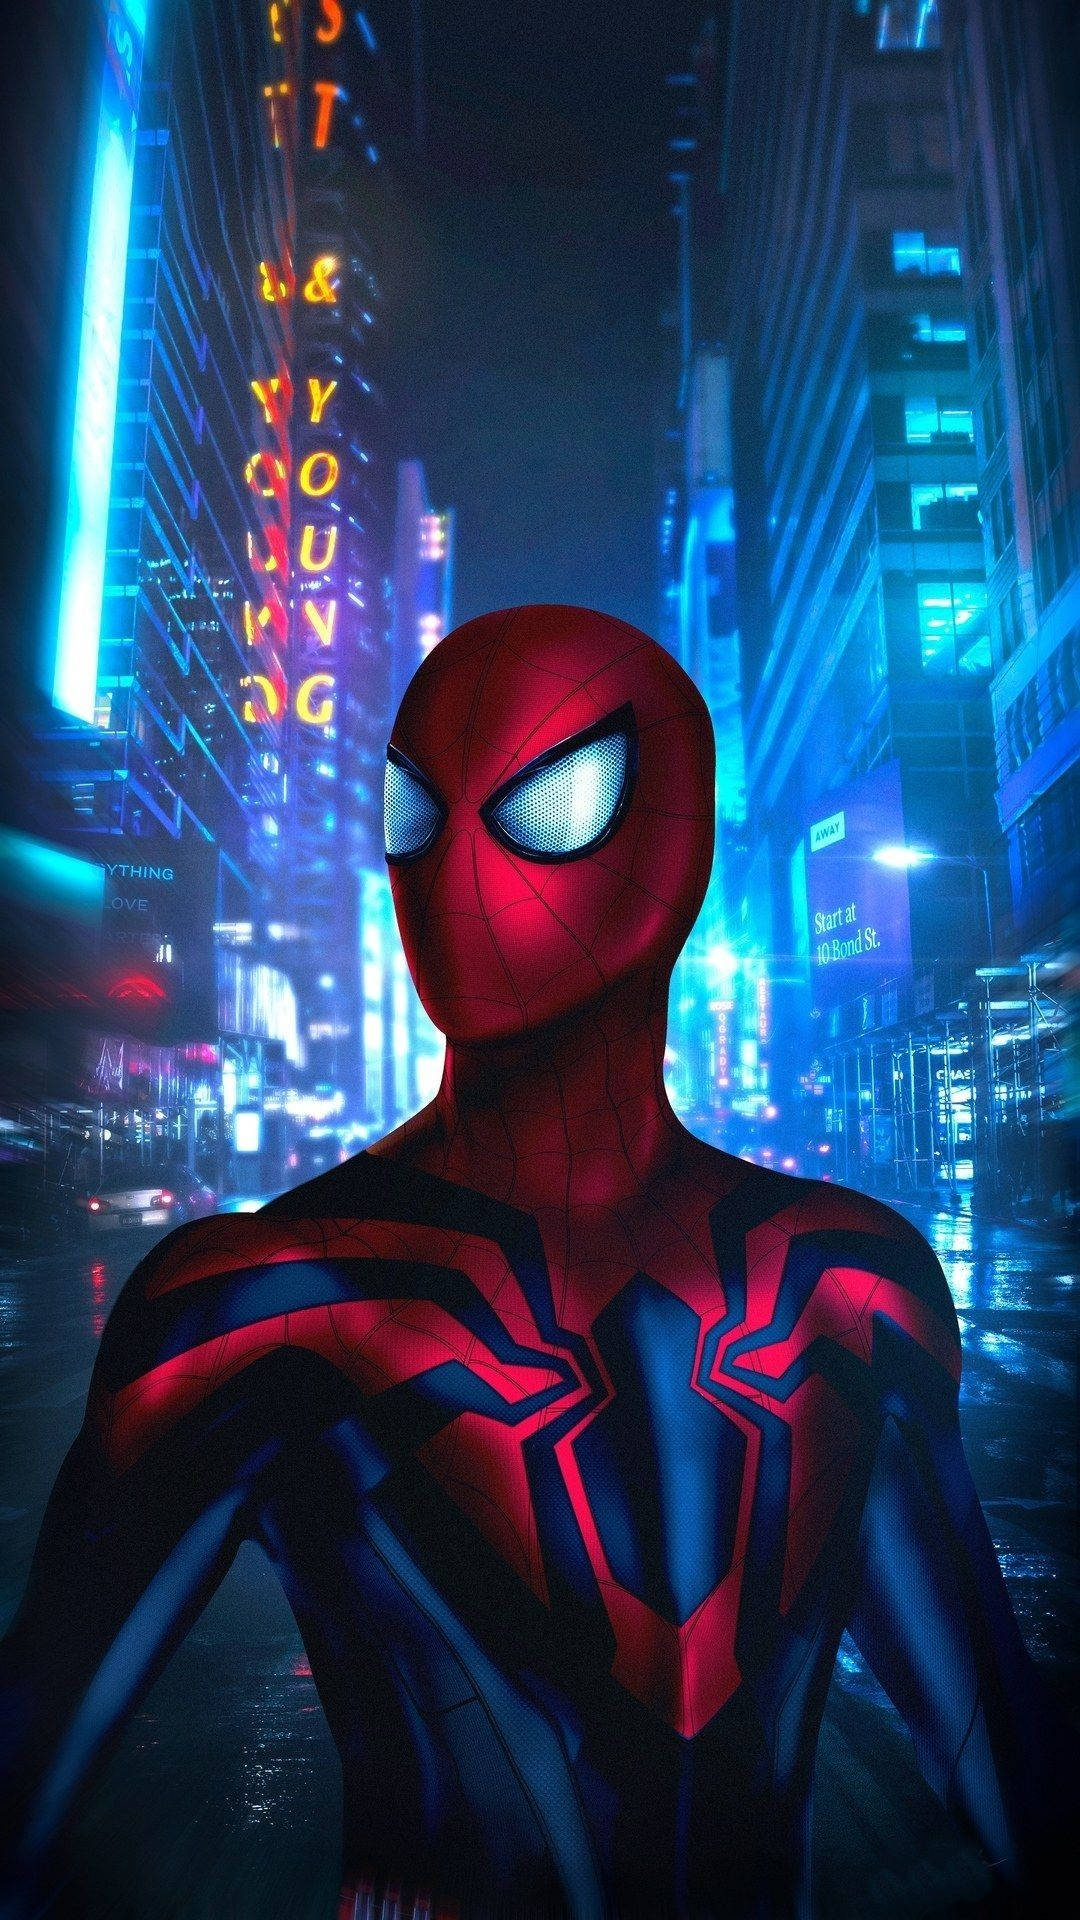 Caption: Exciting Spiderman Wallpaper For Oneplus 8 Pro Users Wallpaper